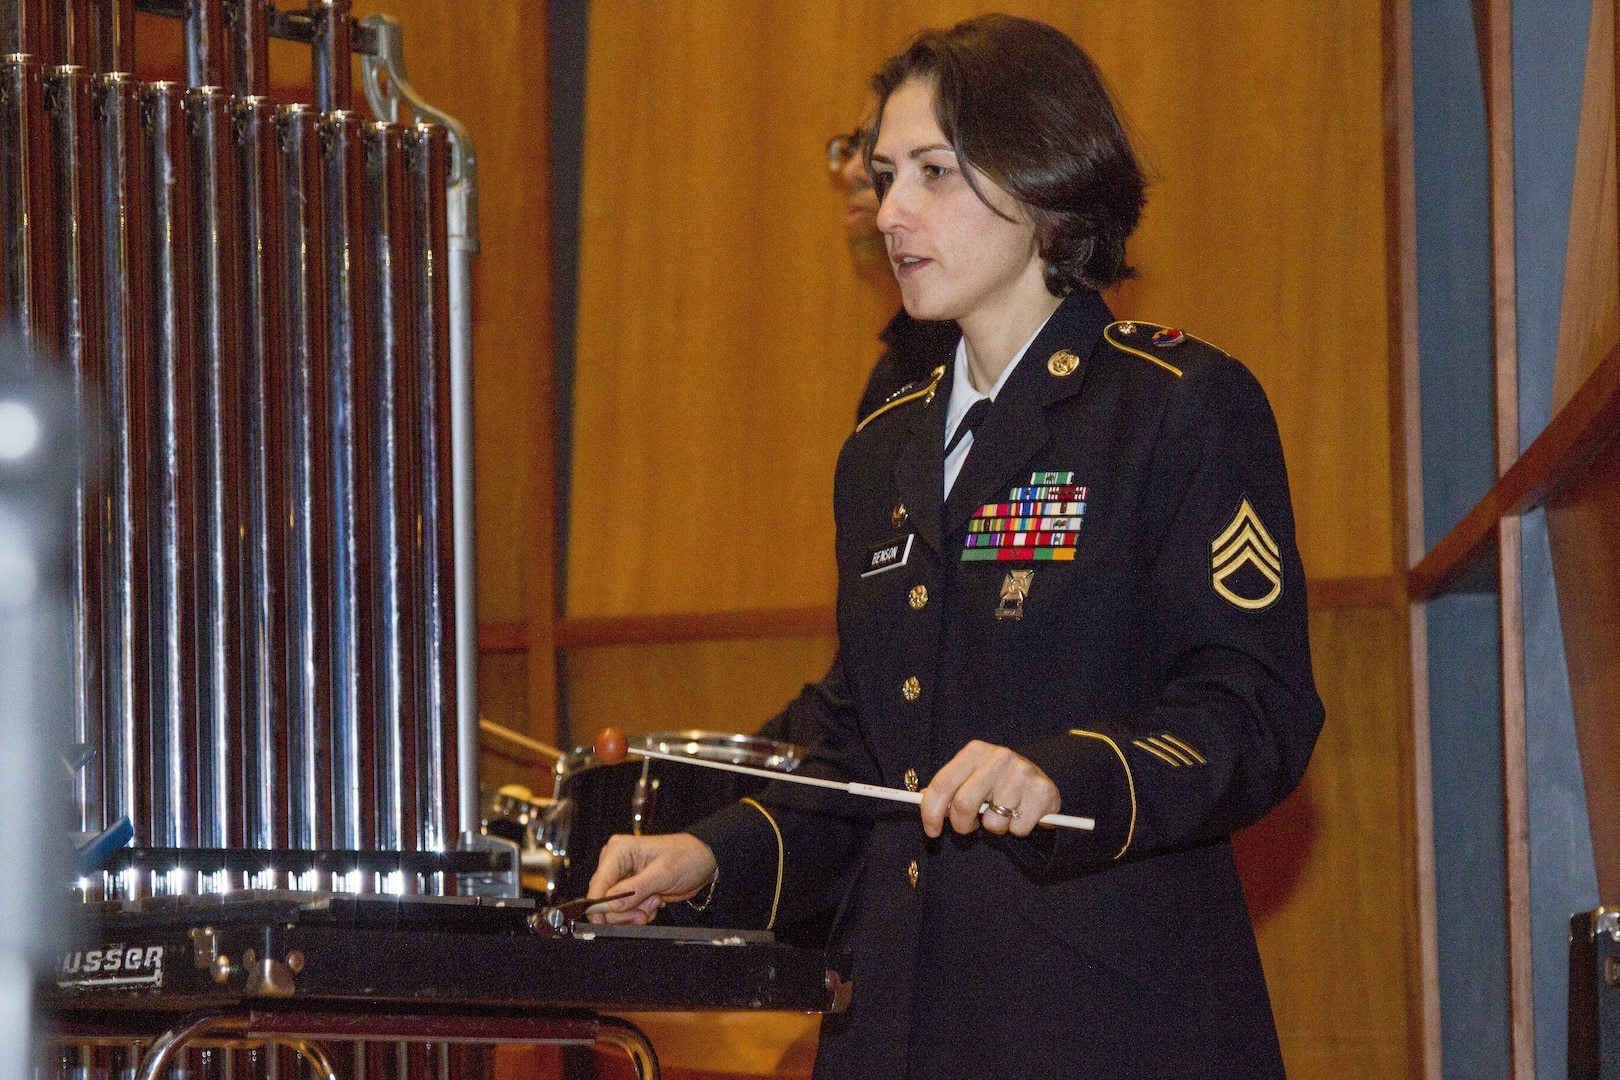 U.S. Army Staff Sgt. Yulia Benson, bandsman, 40th Army Band, Vermont Army National Guard plays during a concert.